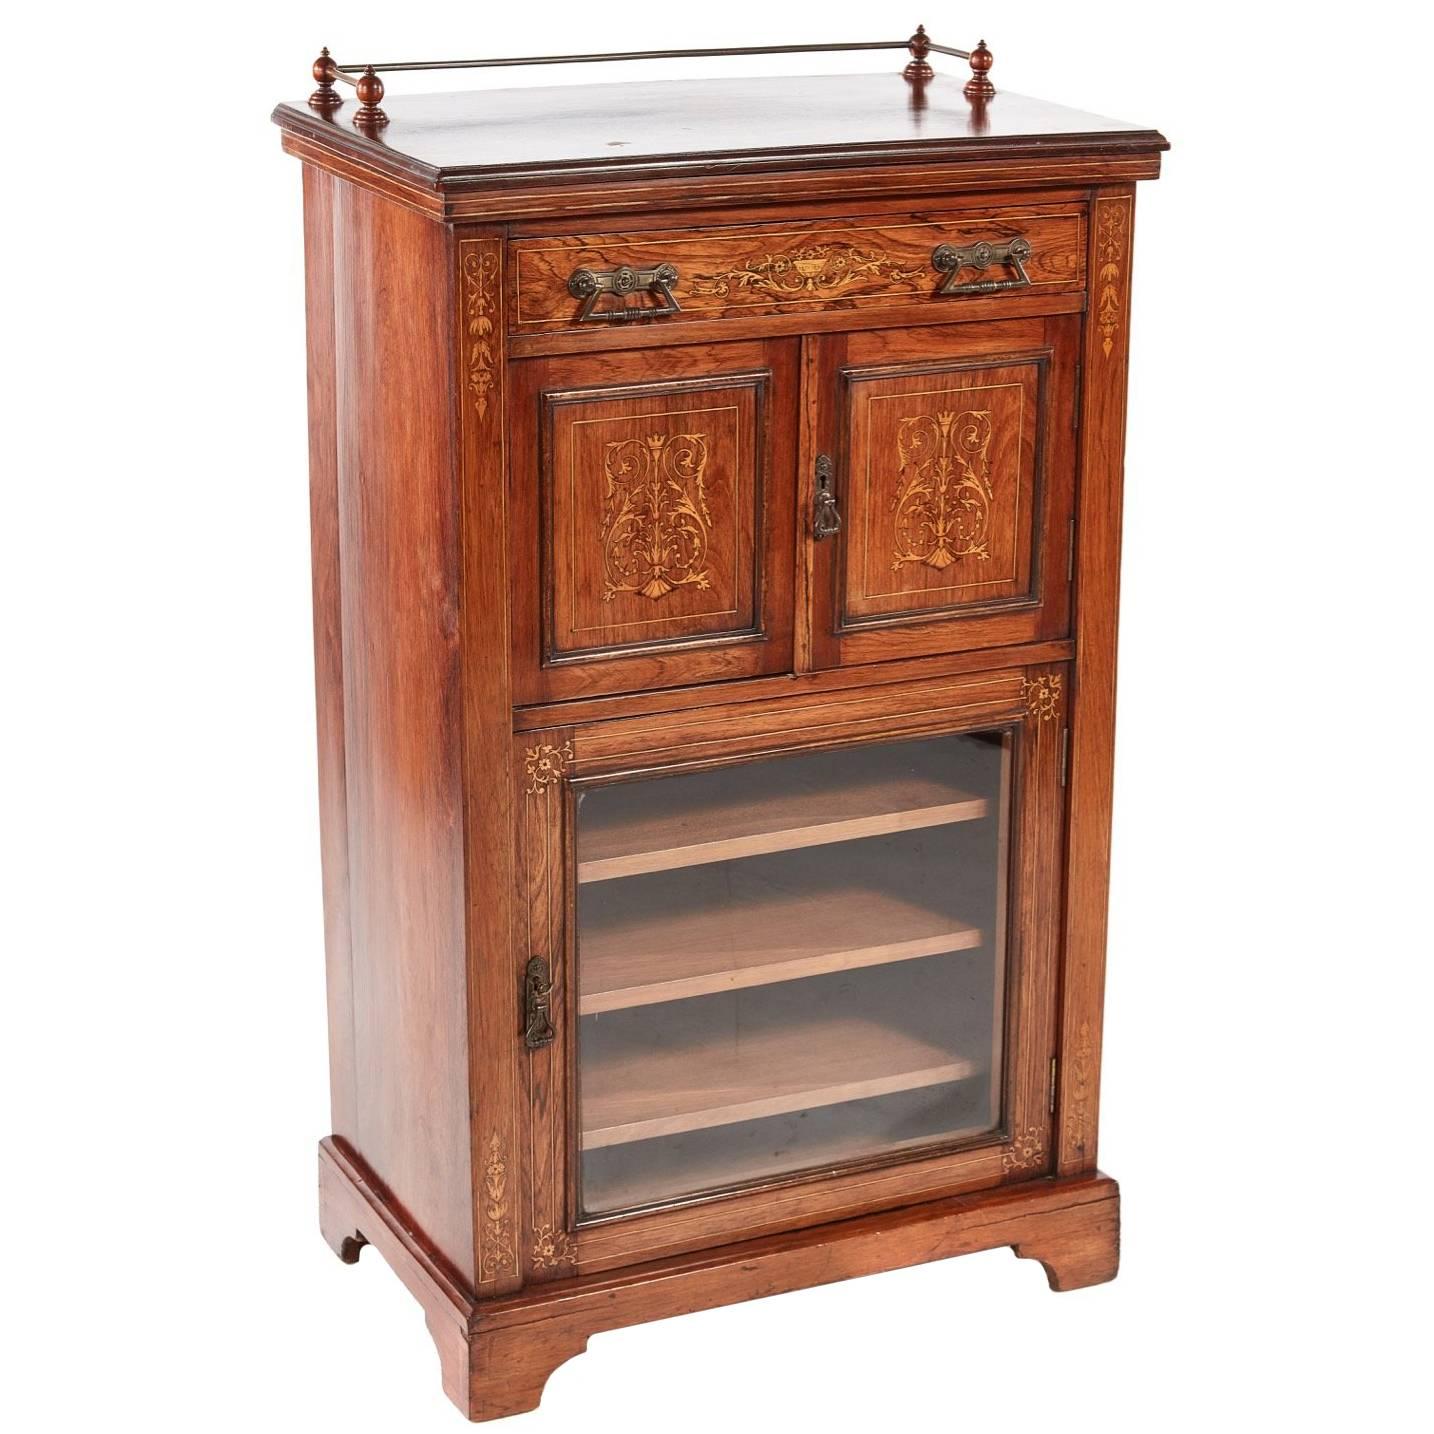 Good Quality Rosewood Inlaid Music Cabinet